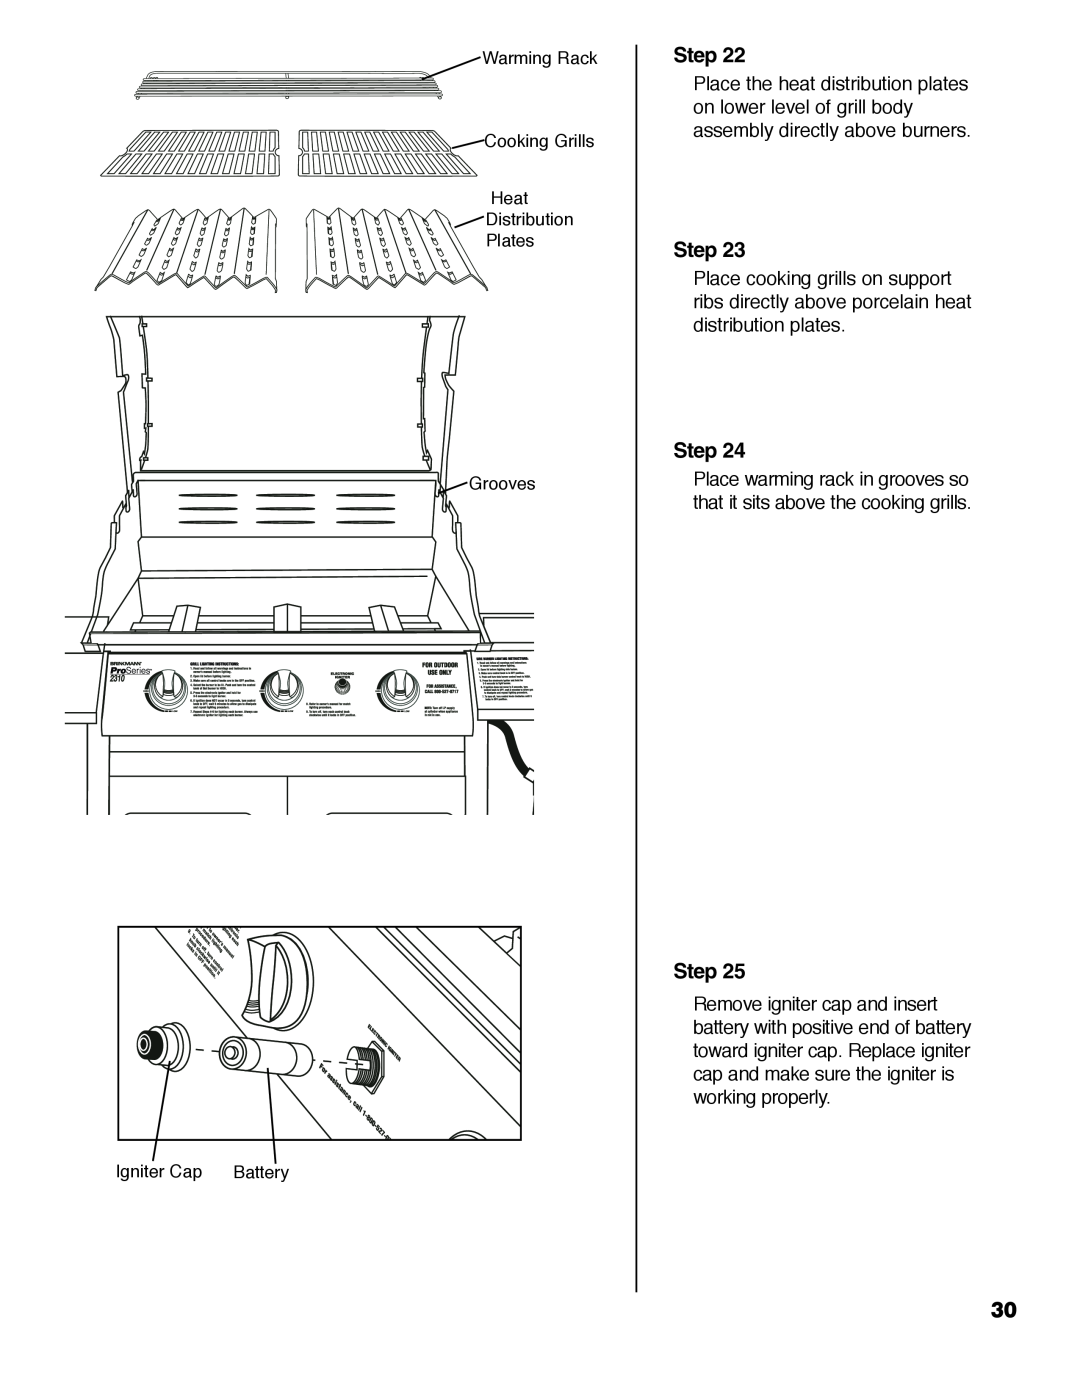 Brinkmann ProSeries 2310 Step, Place the heat distribution plates, on lower level of grill body, working properly 